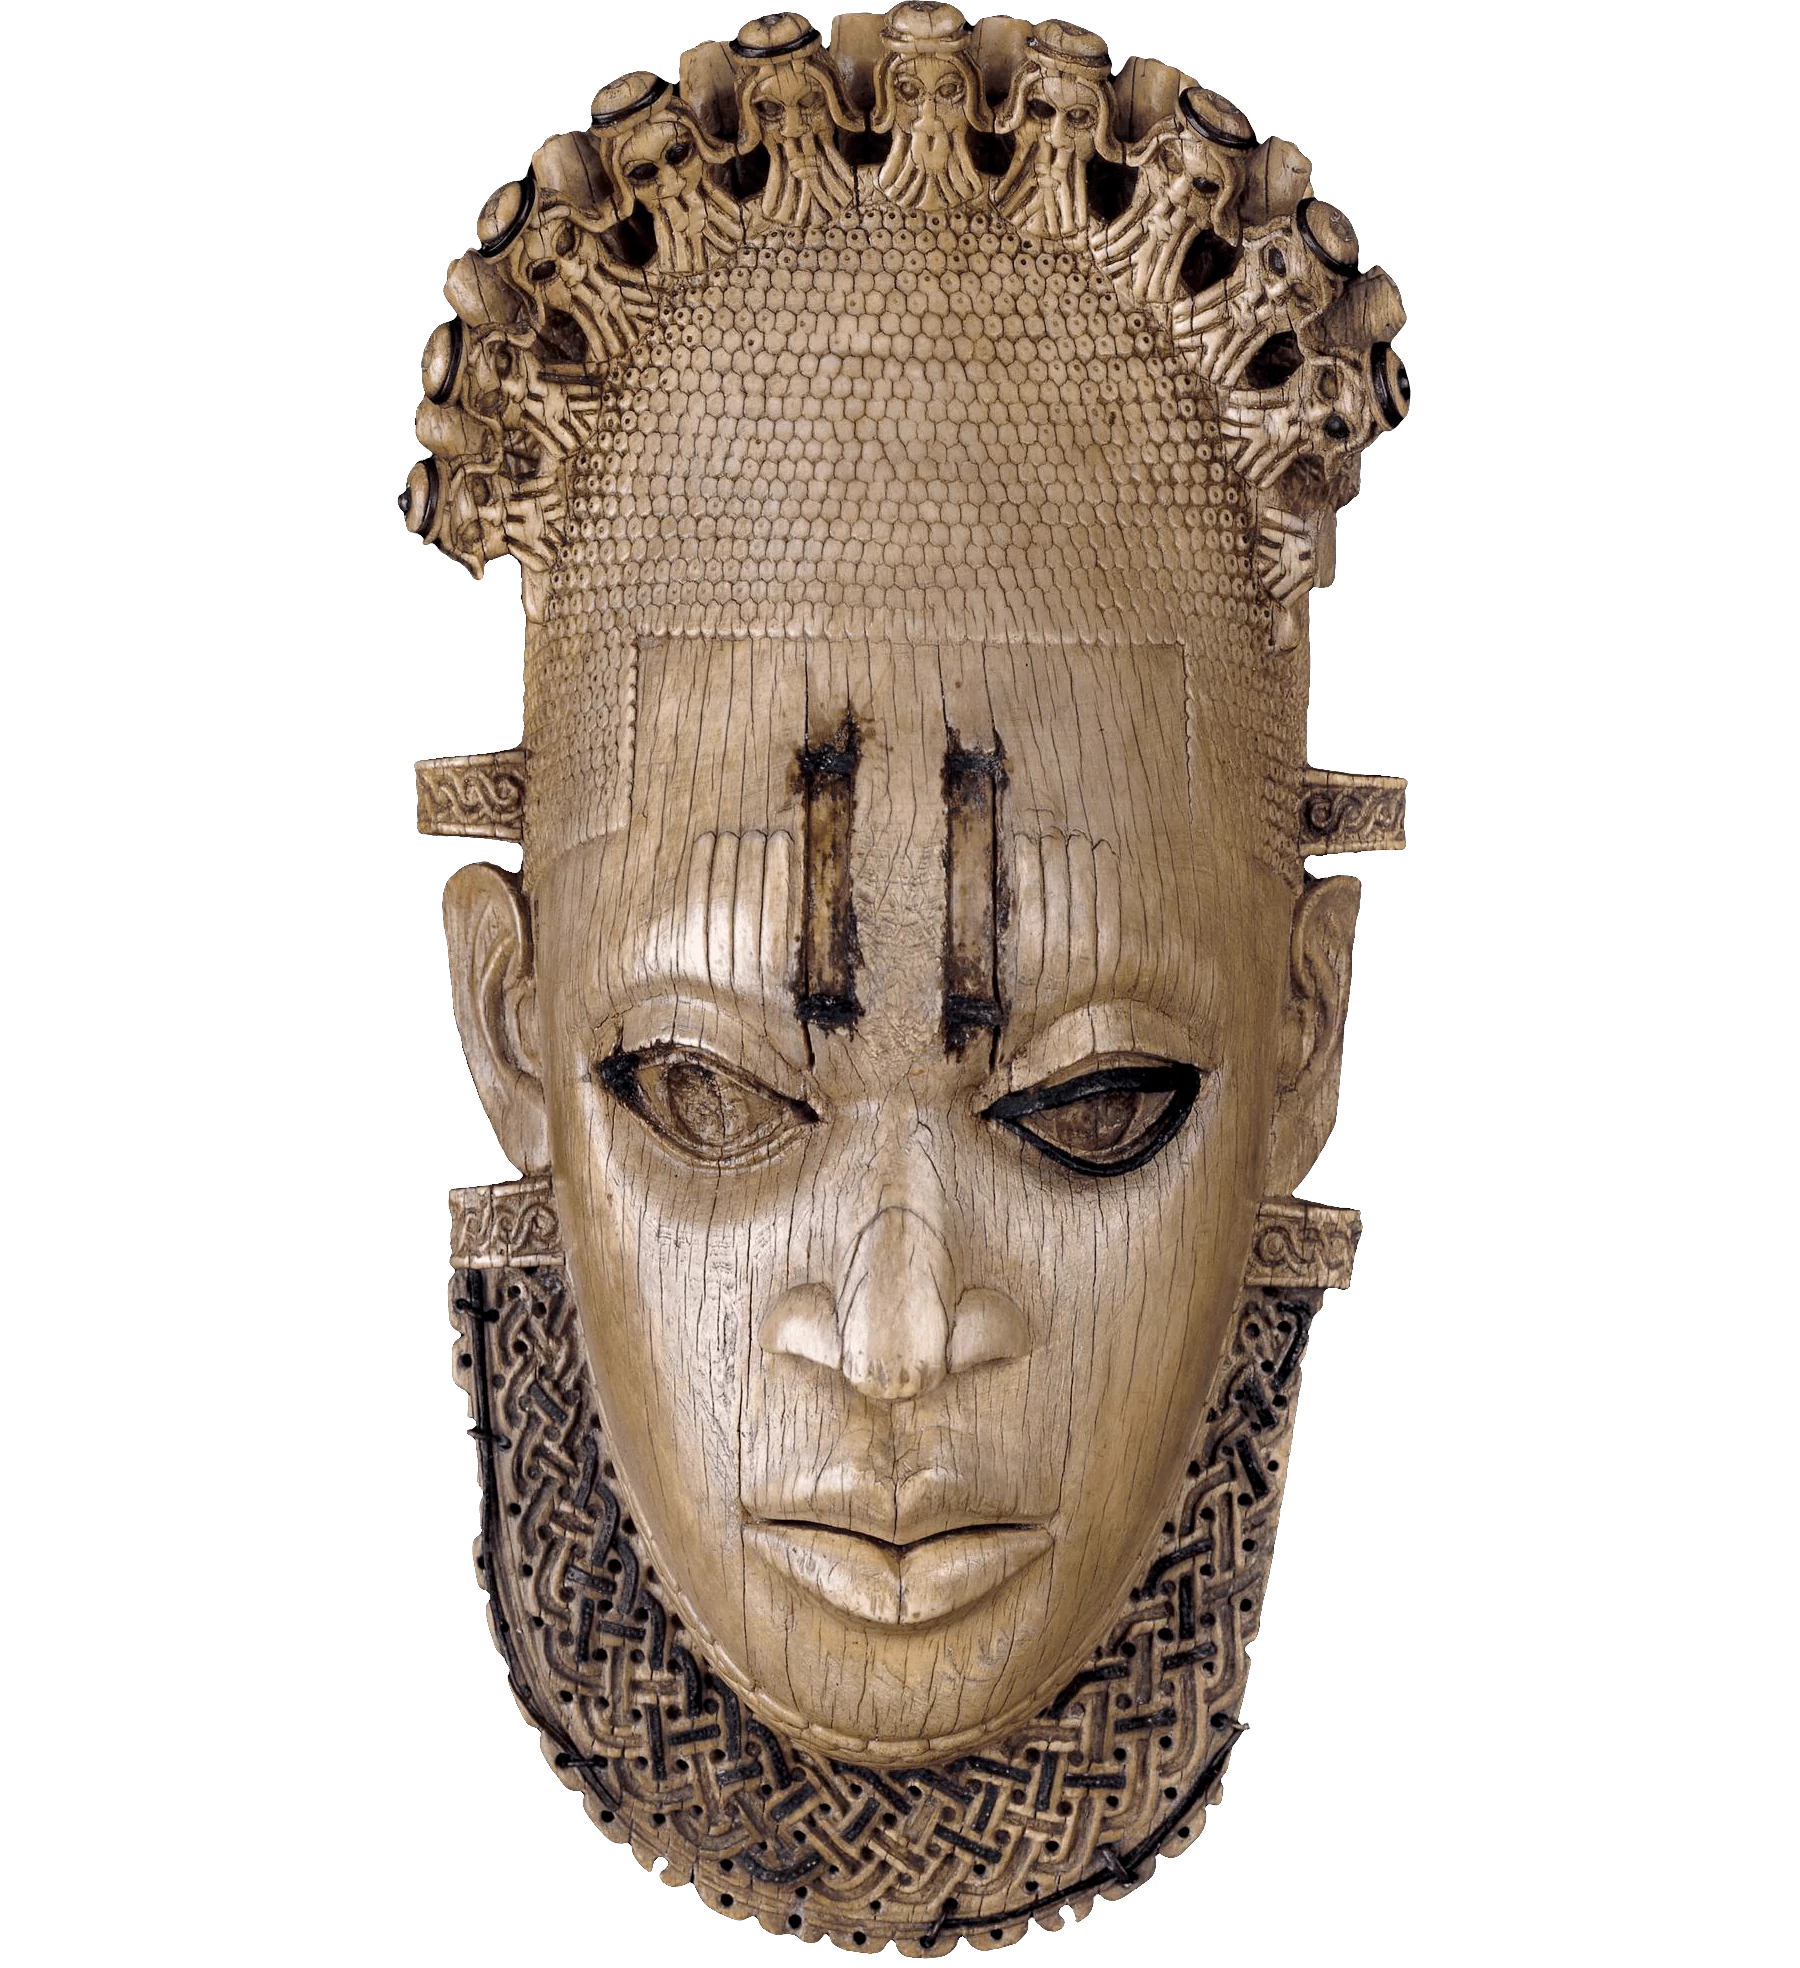 Ivory Hip Pendant in the form of a Face, Kingdom of Benin